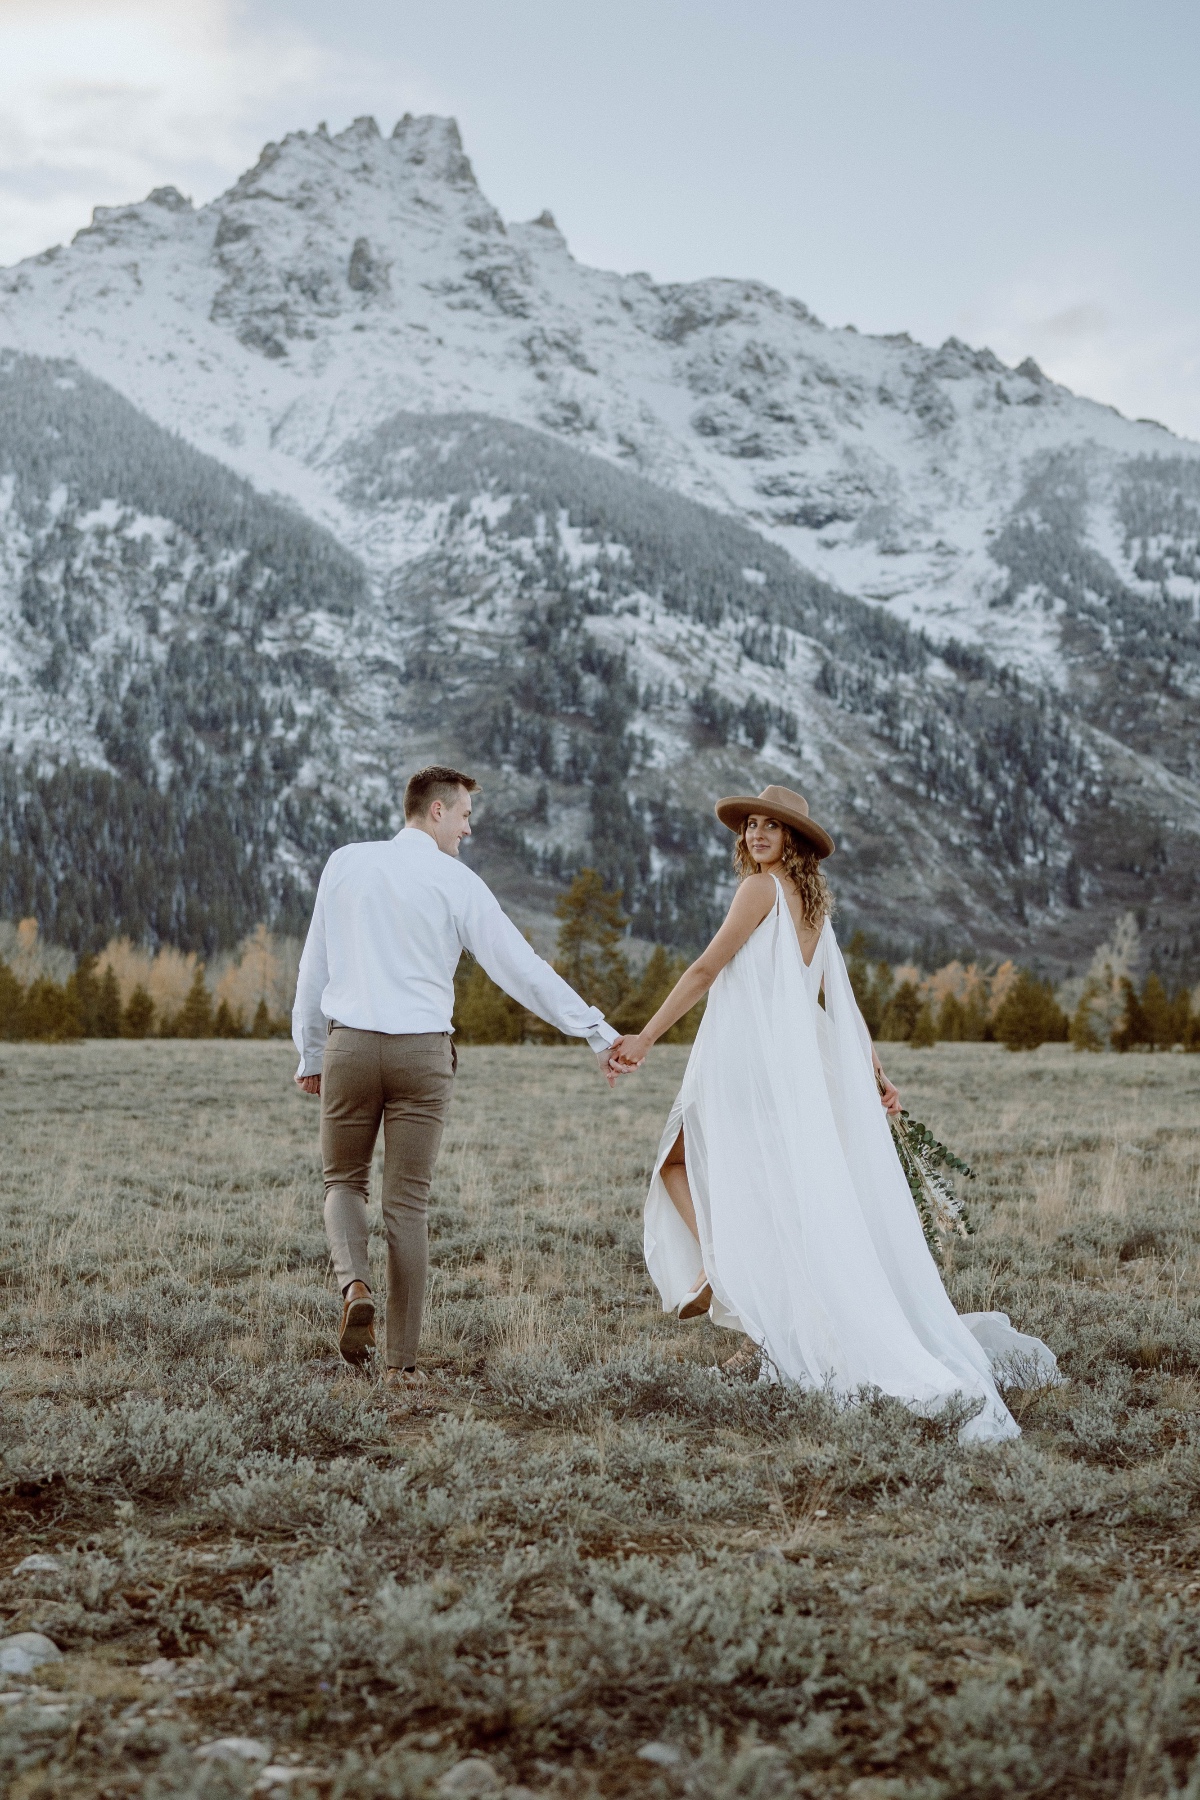 The Adventure Elopement Of Your Dreams